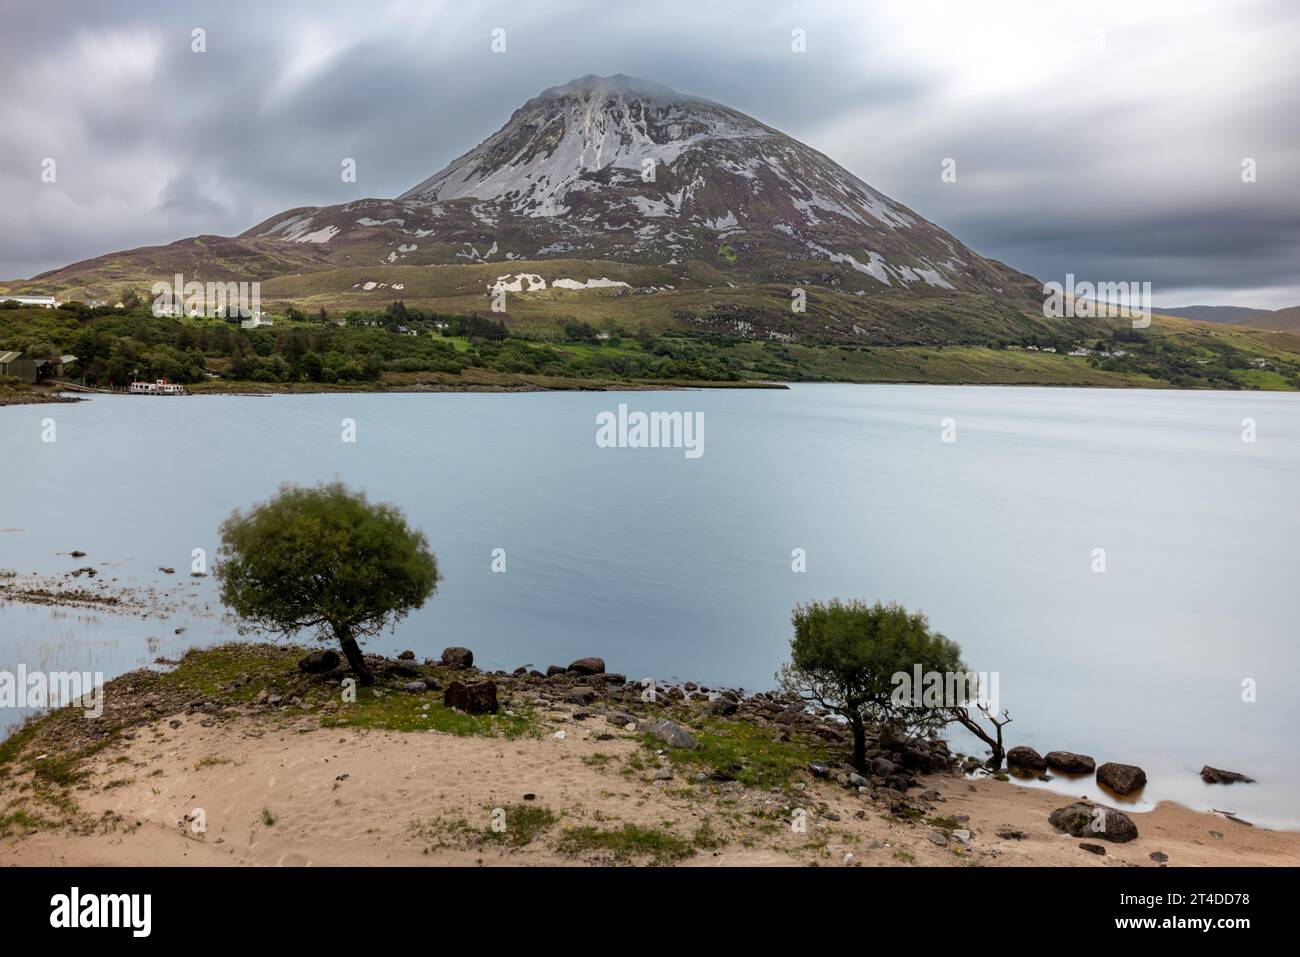 Dunlewey Lough in Ireland, a picturesque lake nestled between the majestic Mount Errigal and the Poisoned Glen. Stock Photo